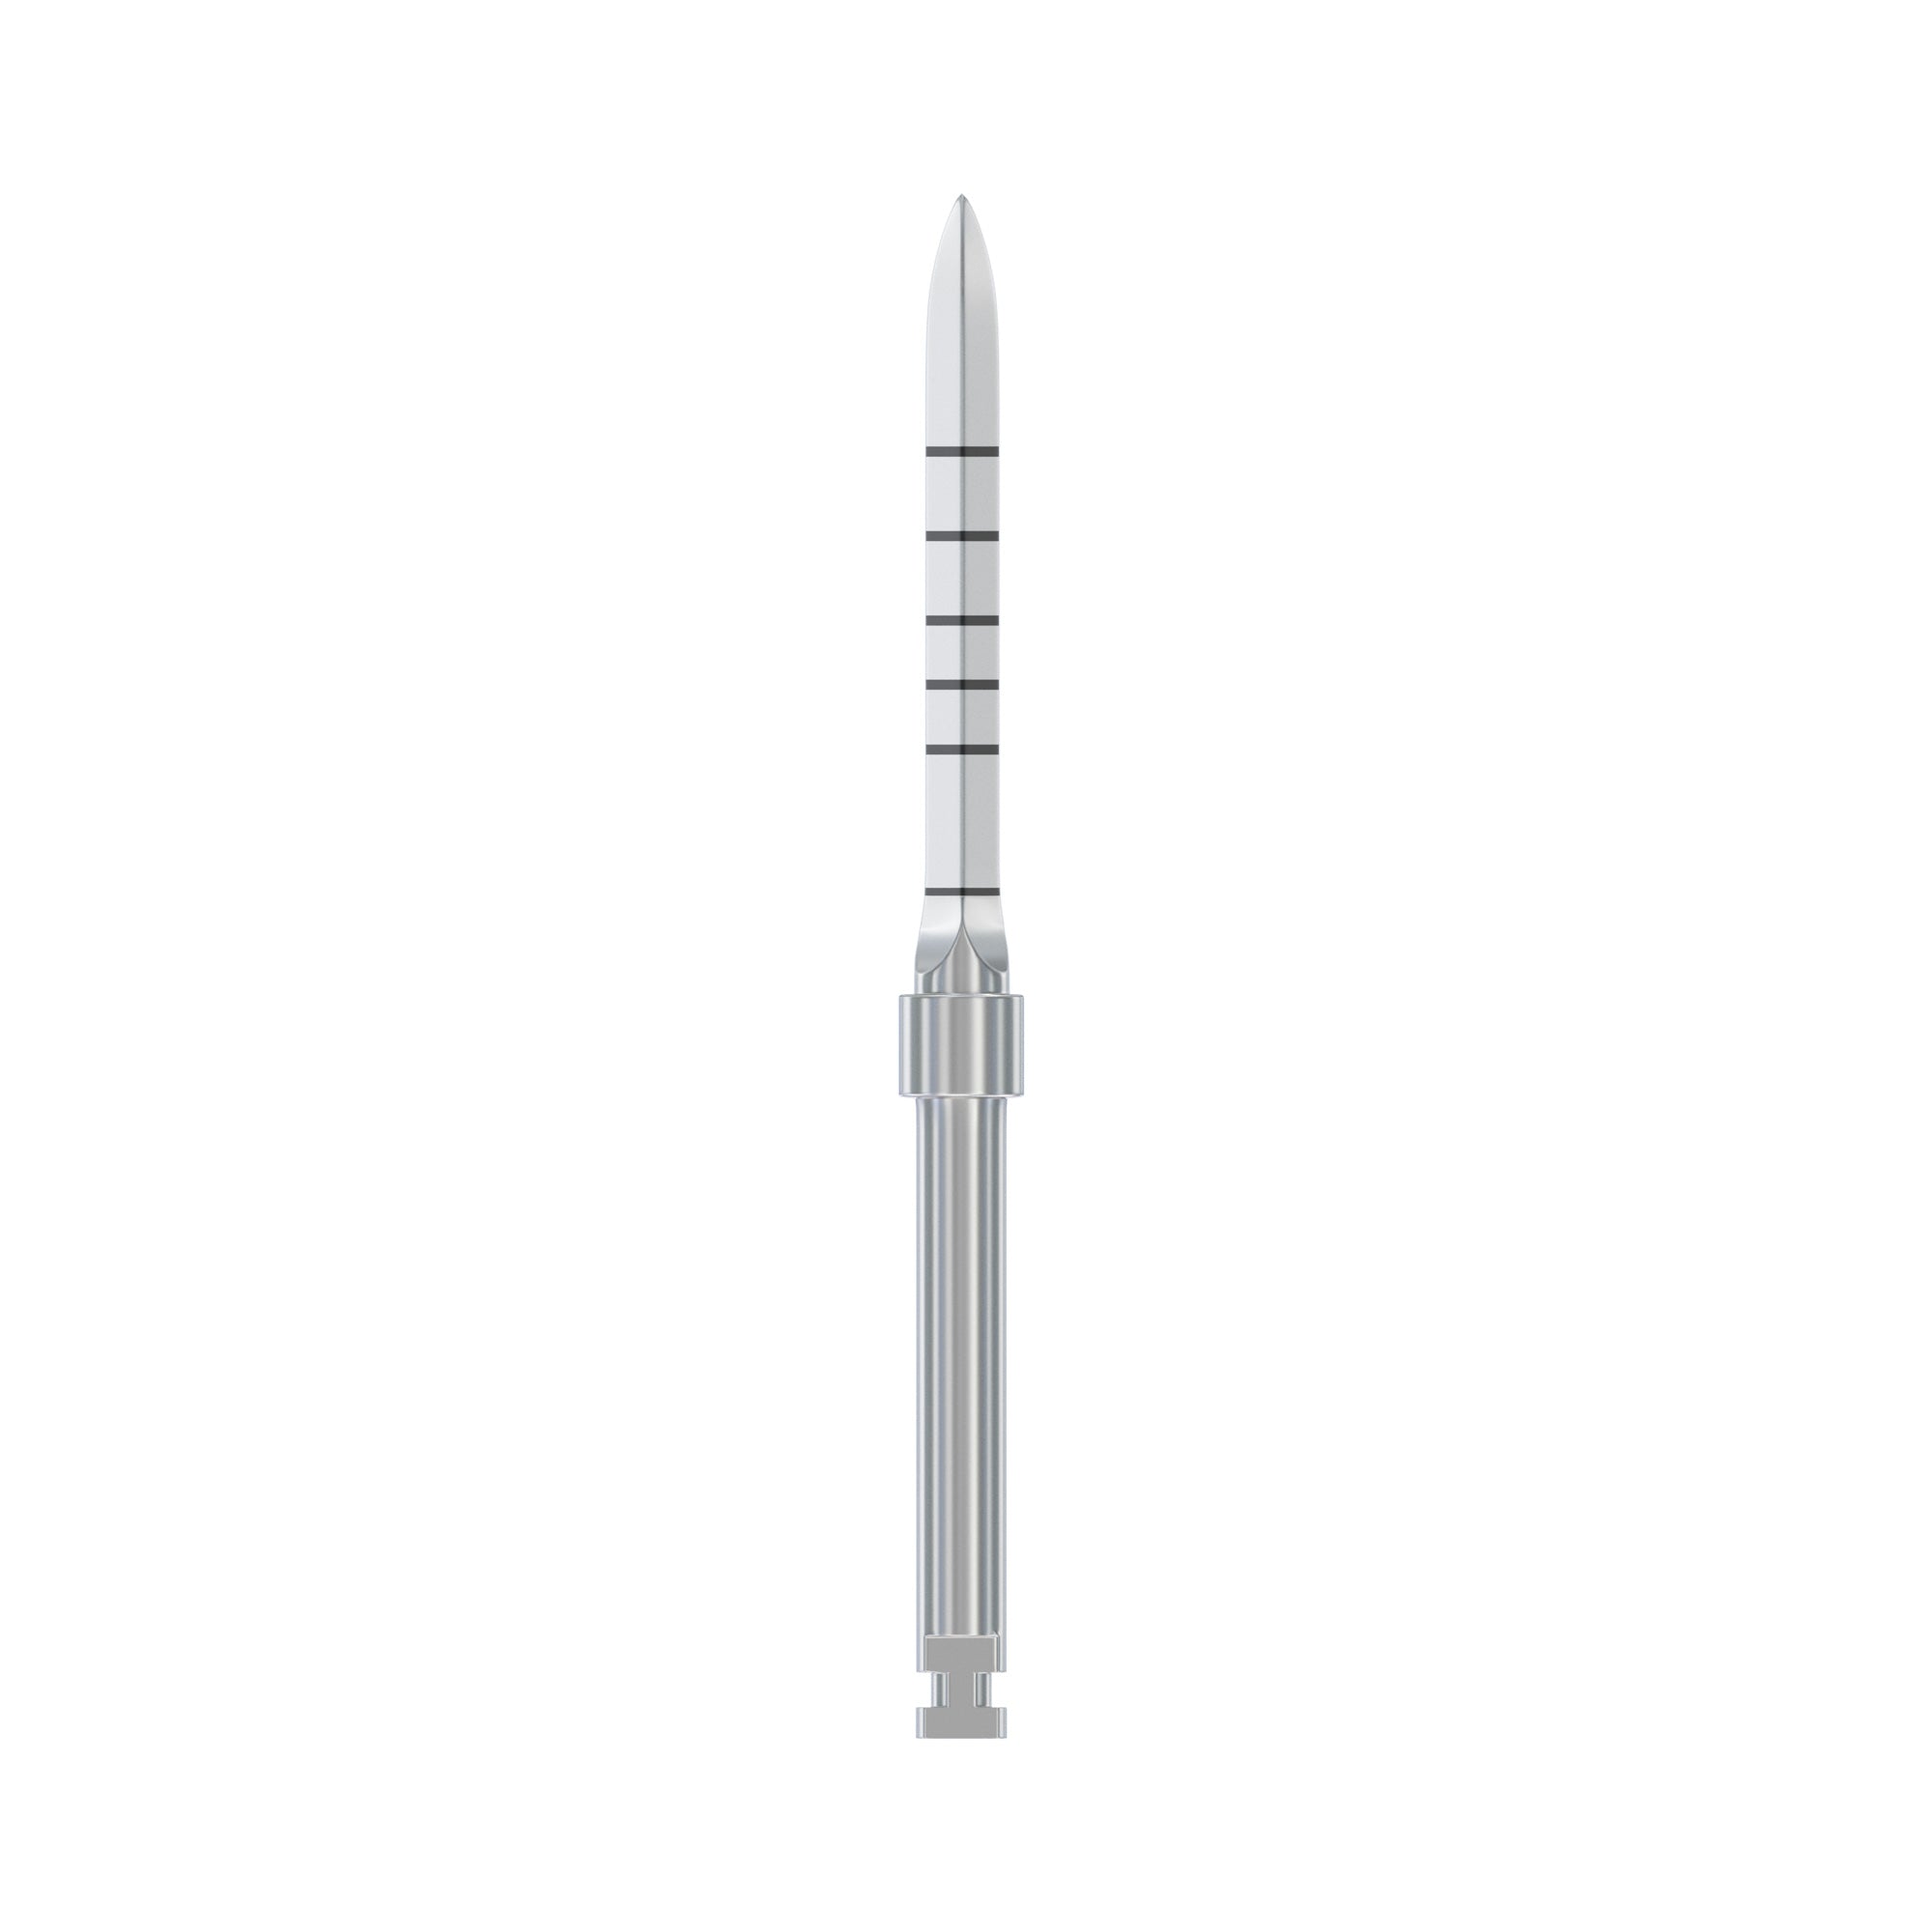 DSI Surgical Lance Initial Drills For Implant Socket Preparation